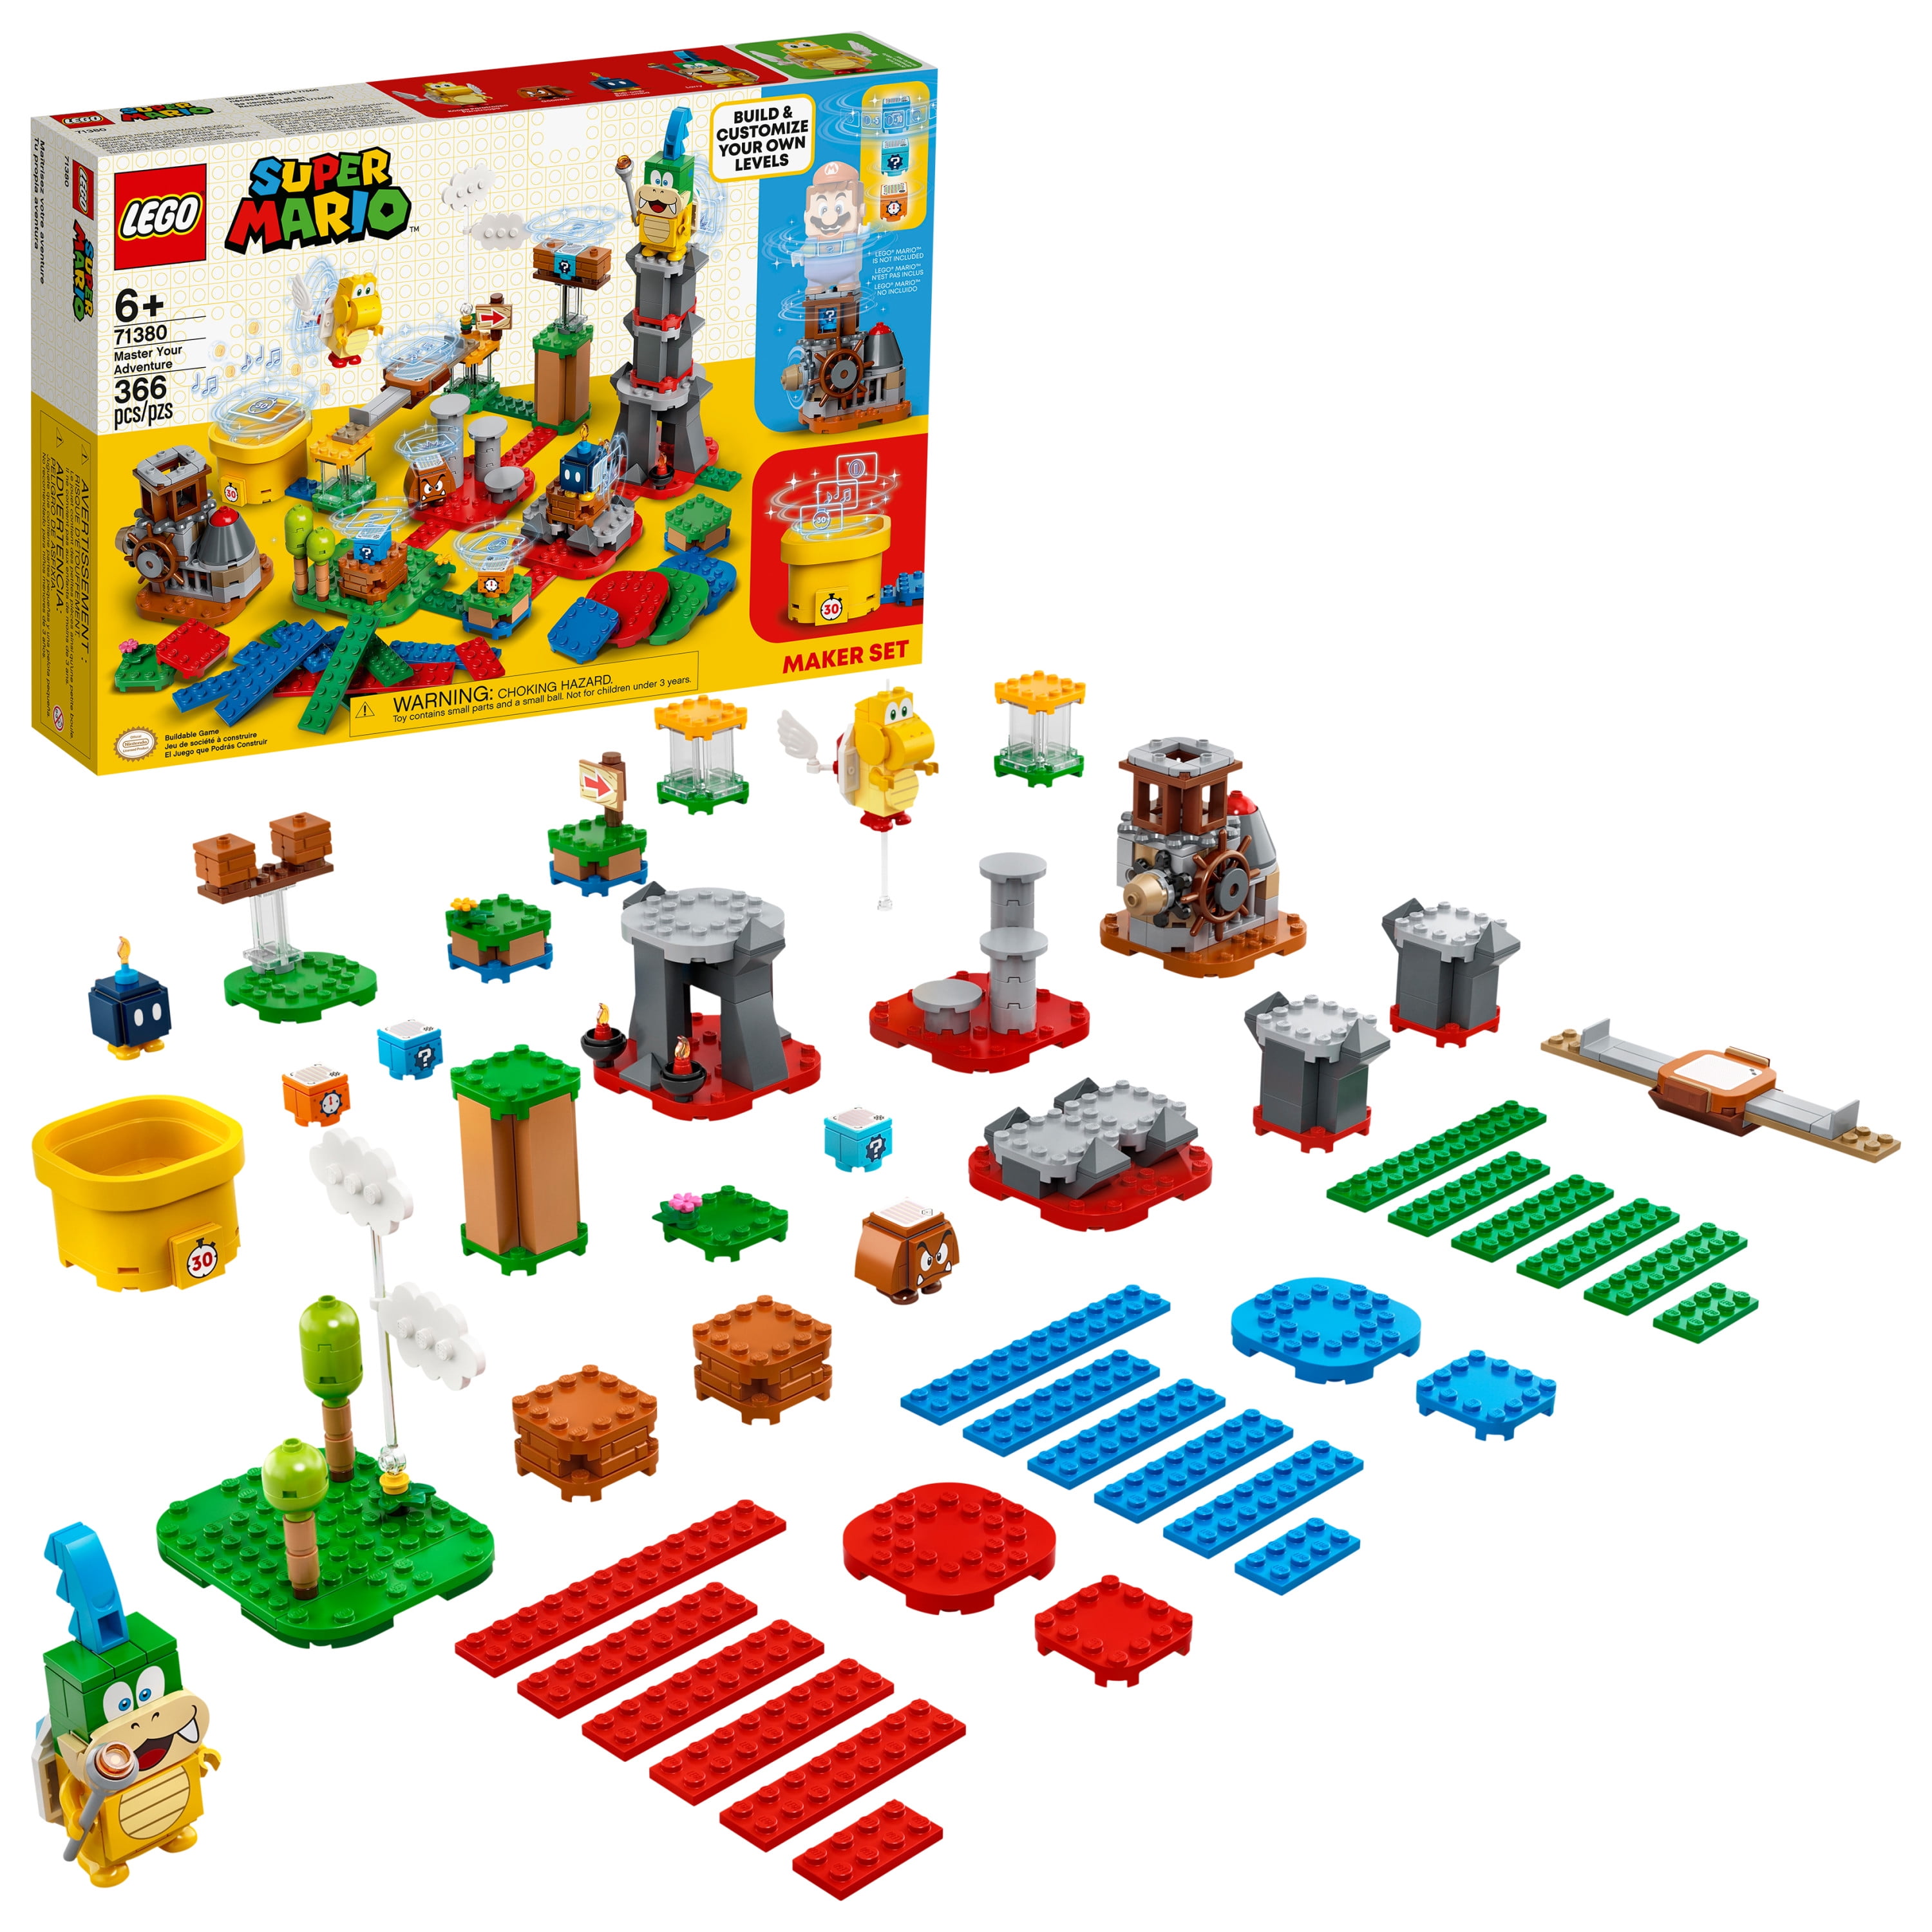 LEGO Super Mario Toad’s Treasure Hunt Expansion Set 71368 Building Kit; Toy for Kids to Boost Their LEGO Super Mario Adventures with Mario Starter Course 464 Pieces 71360 New 2020 Playset